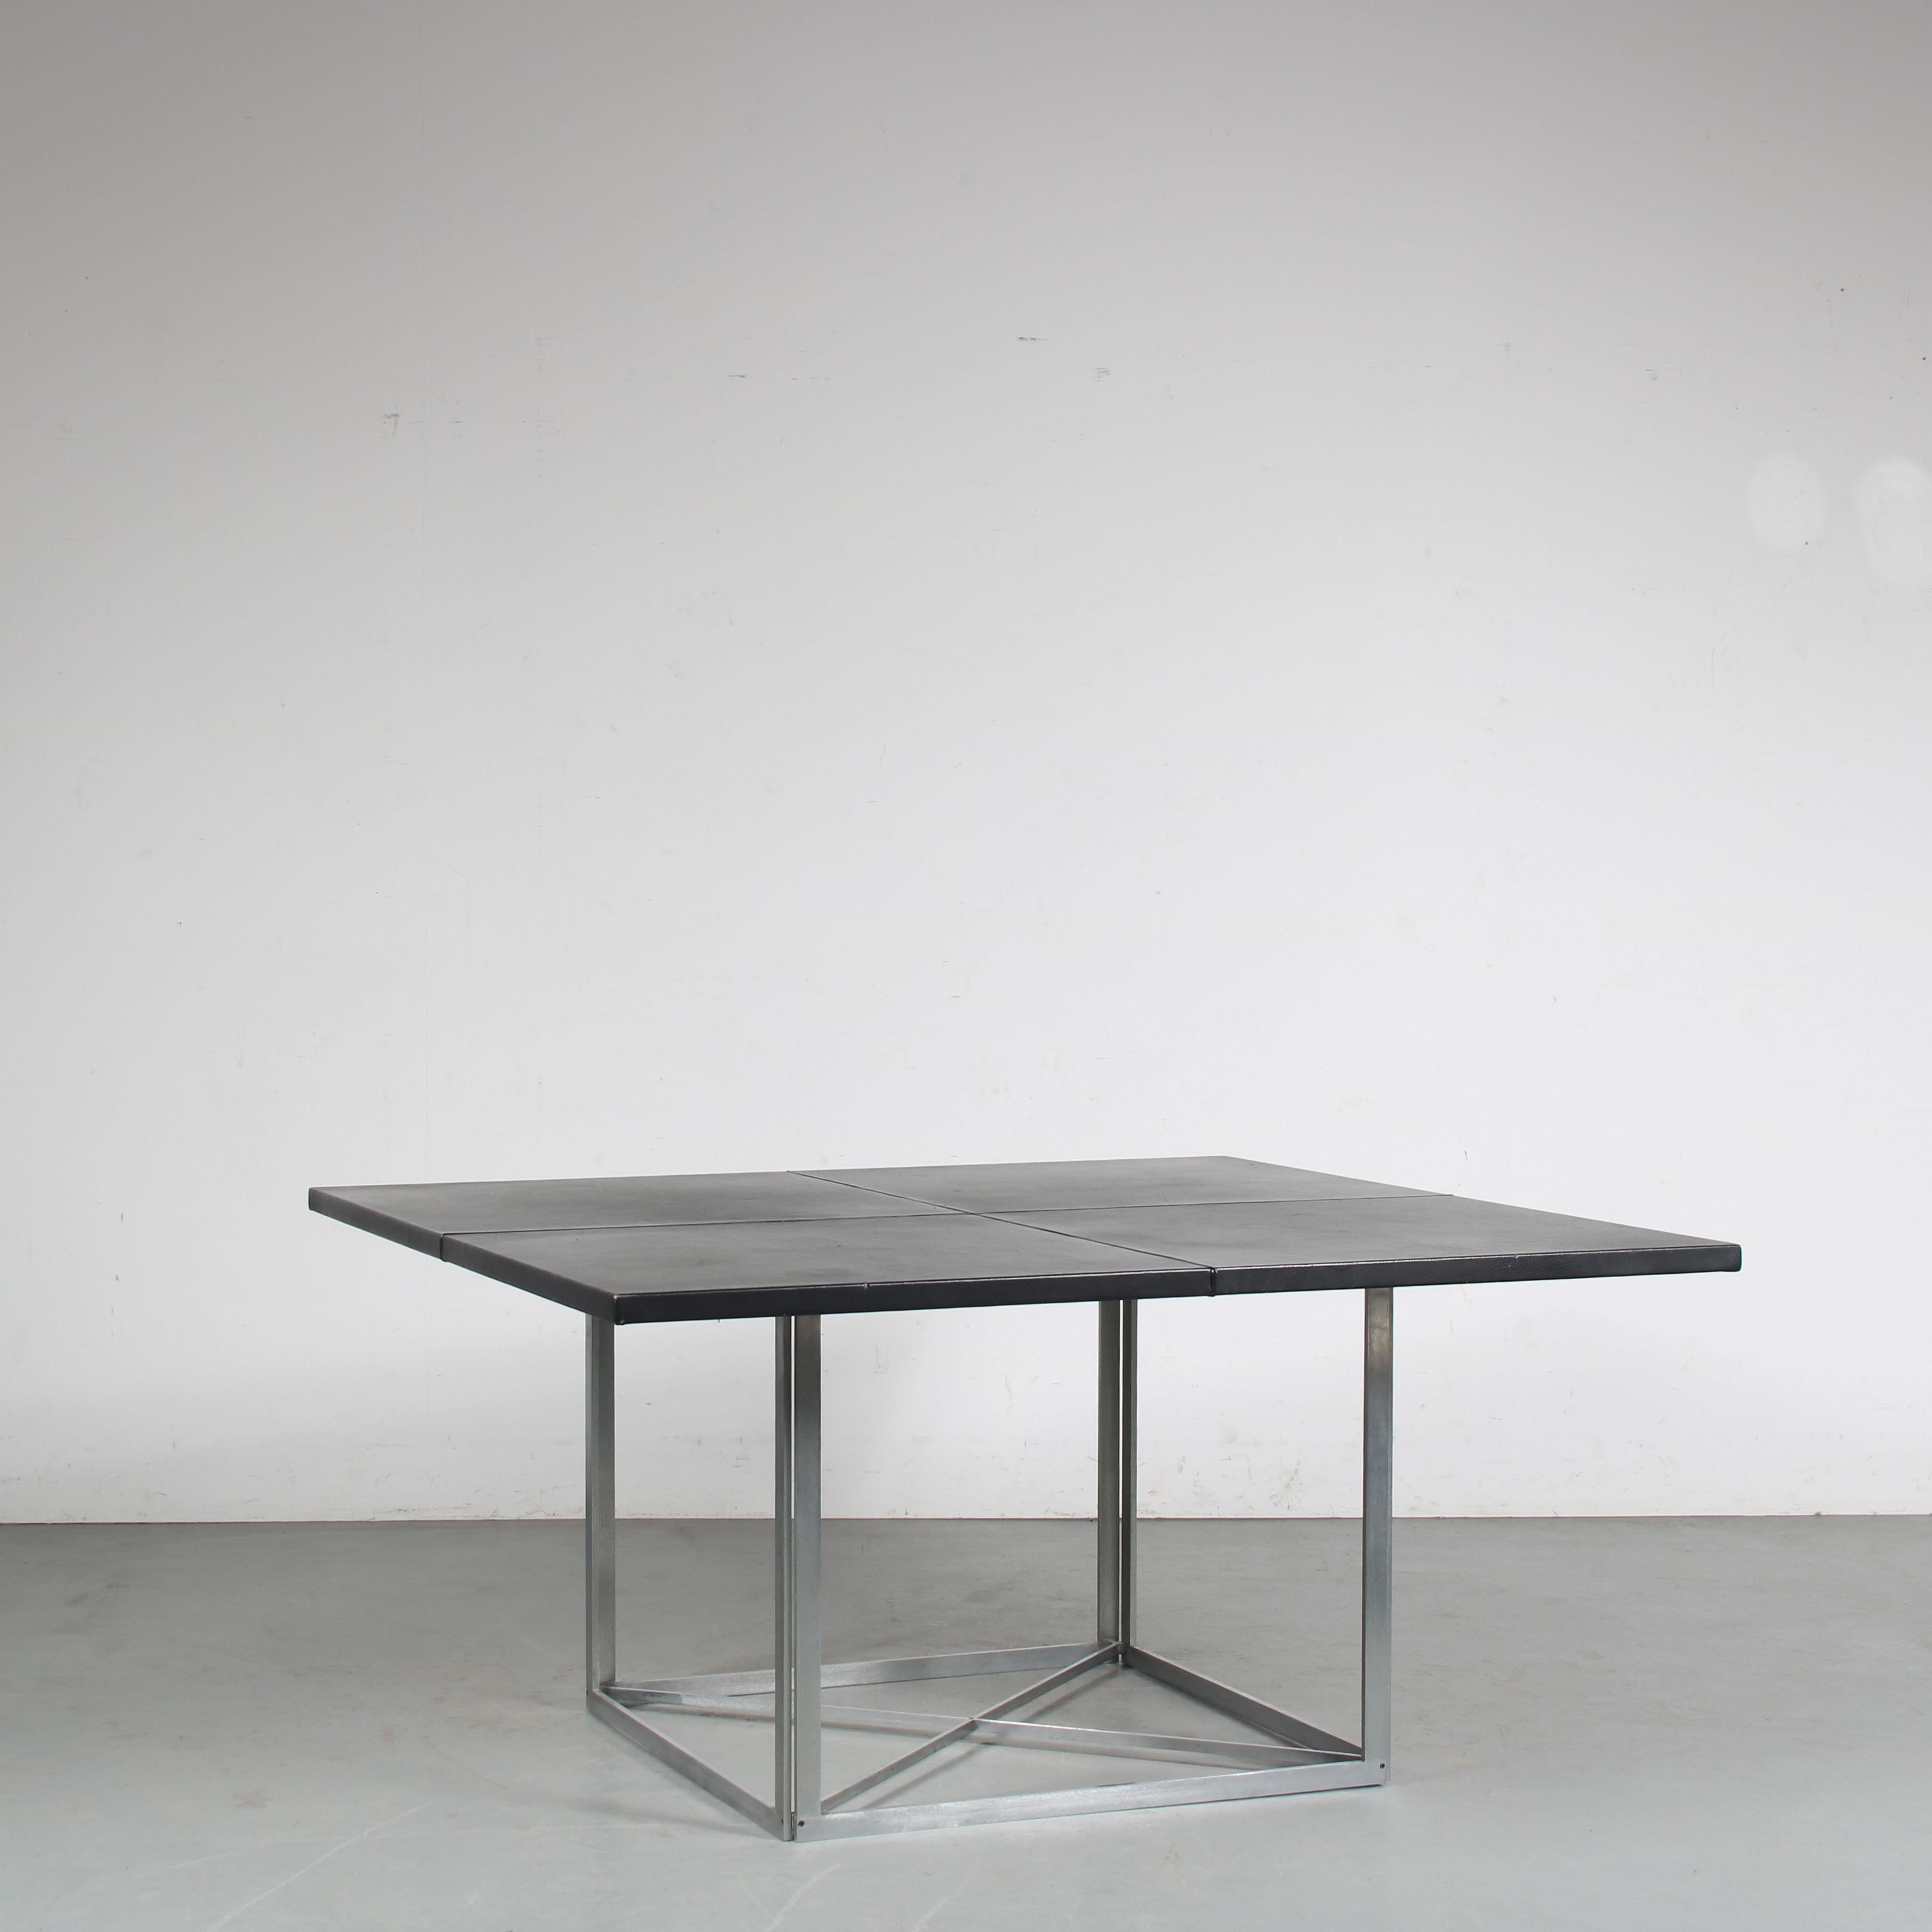 An eye-catching dining table, model PK40, designed by Poul Kjaerholm and manufactured by Fritz Hansen in Denmark around 1980.

This iconic and rare piece of mid-century Scandinavian design is made of high quality brushed steel, holding a square